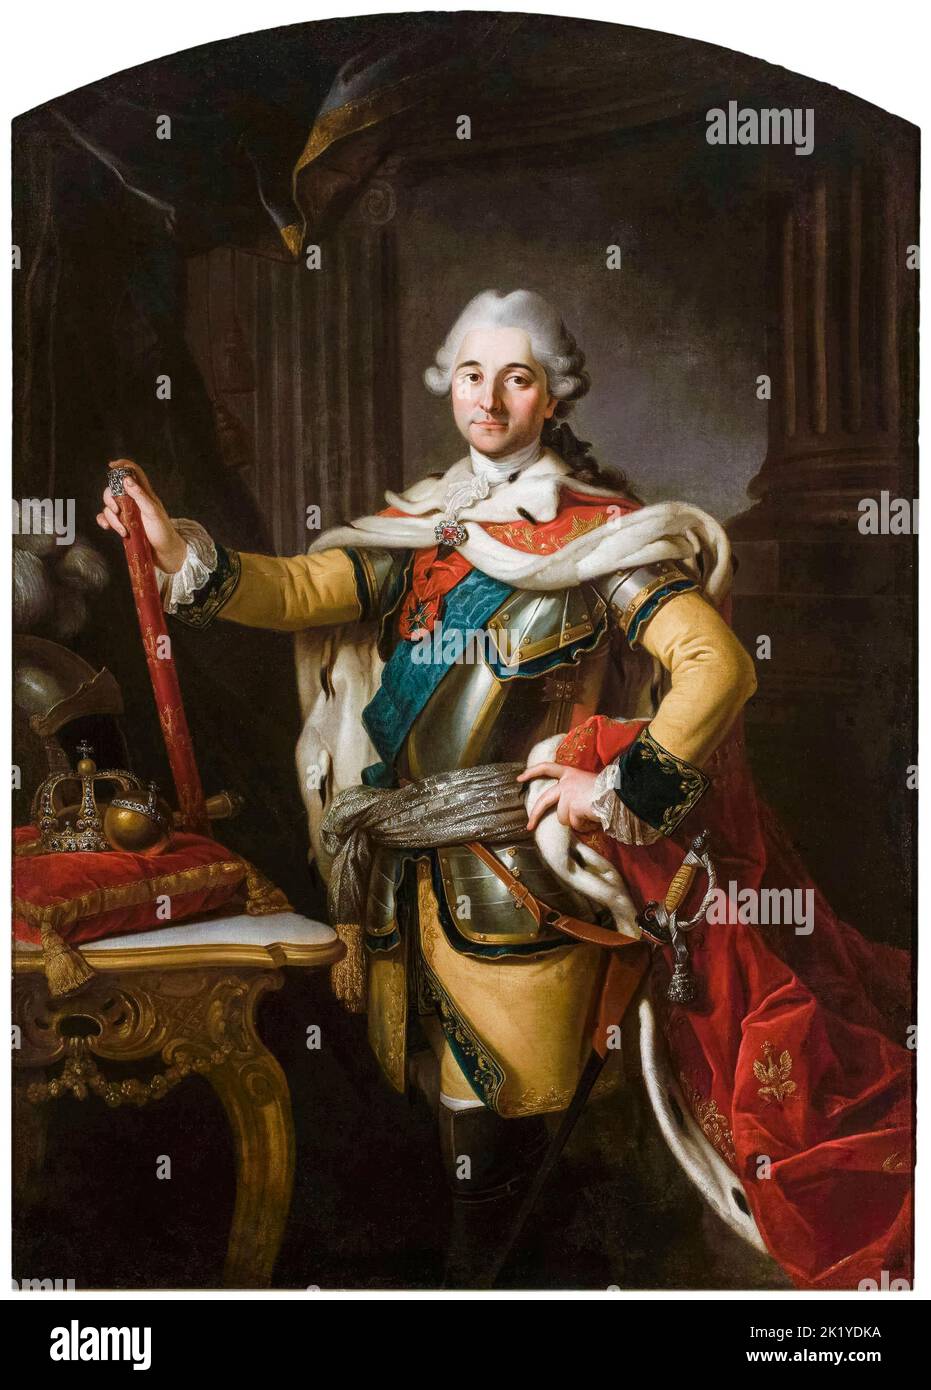 Stanisław II Augustus (1732-1798), King of Poland and Grand Duke of Lithuania (1764-1795), portrait painting in oil on canvas by Per Krafft the Elder, circa 1767 Stock Photo